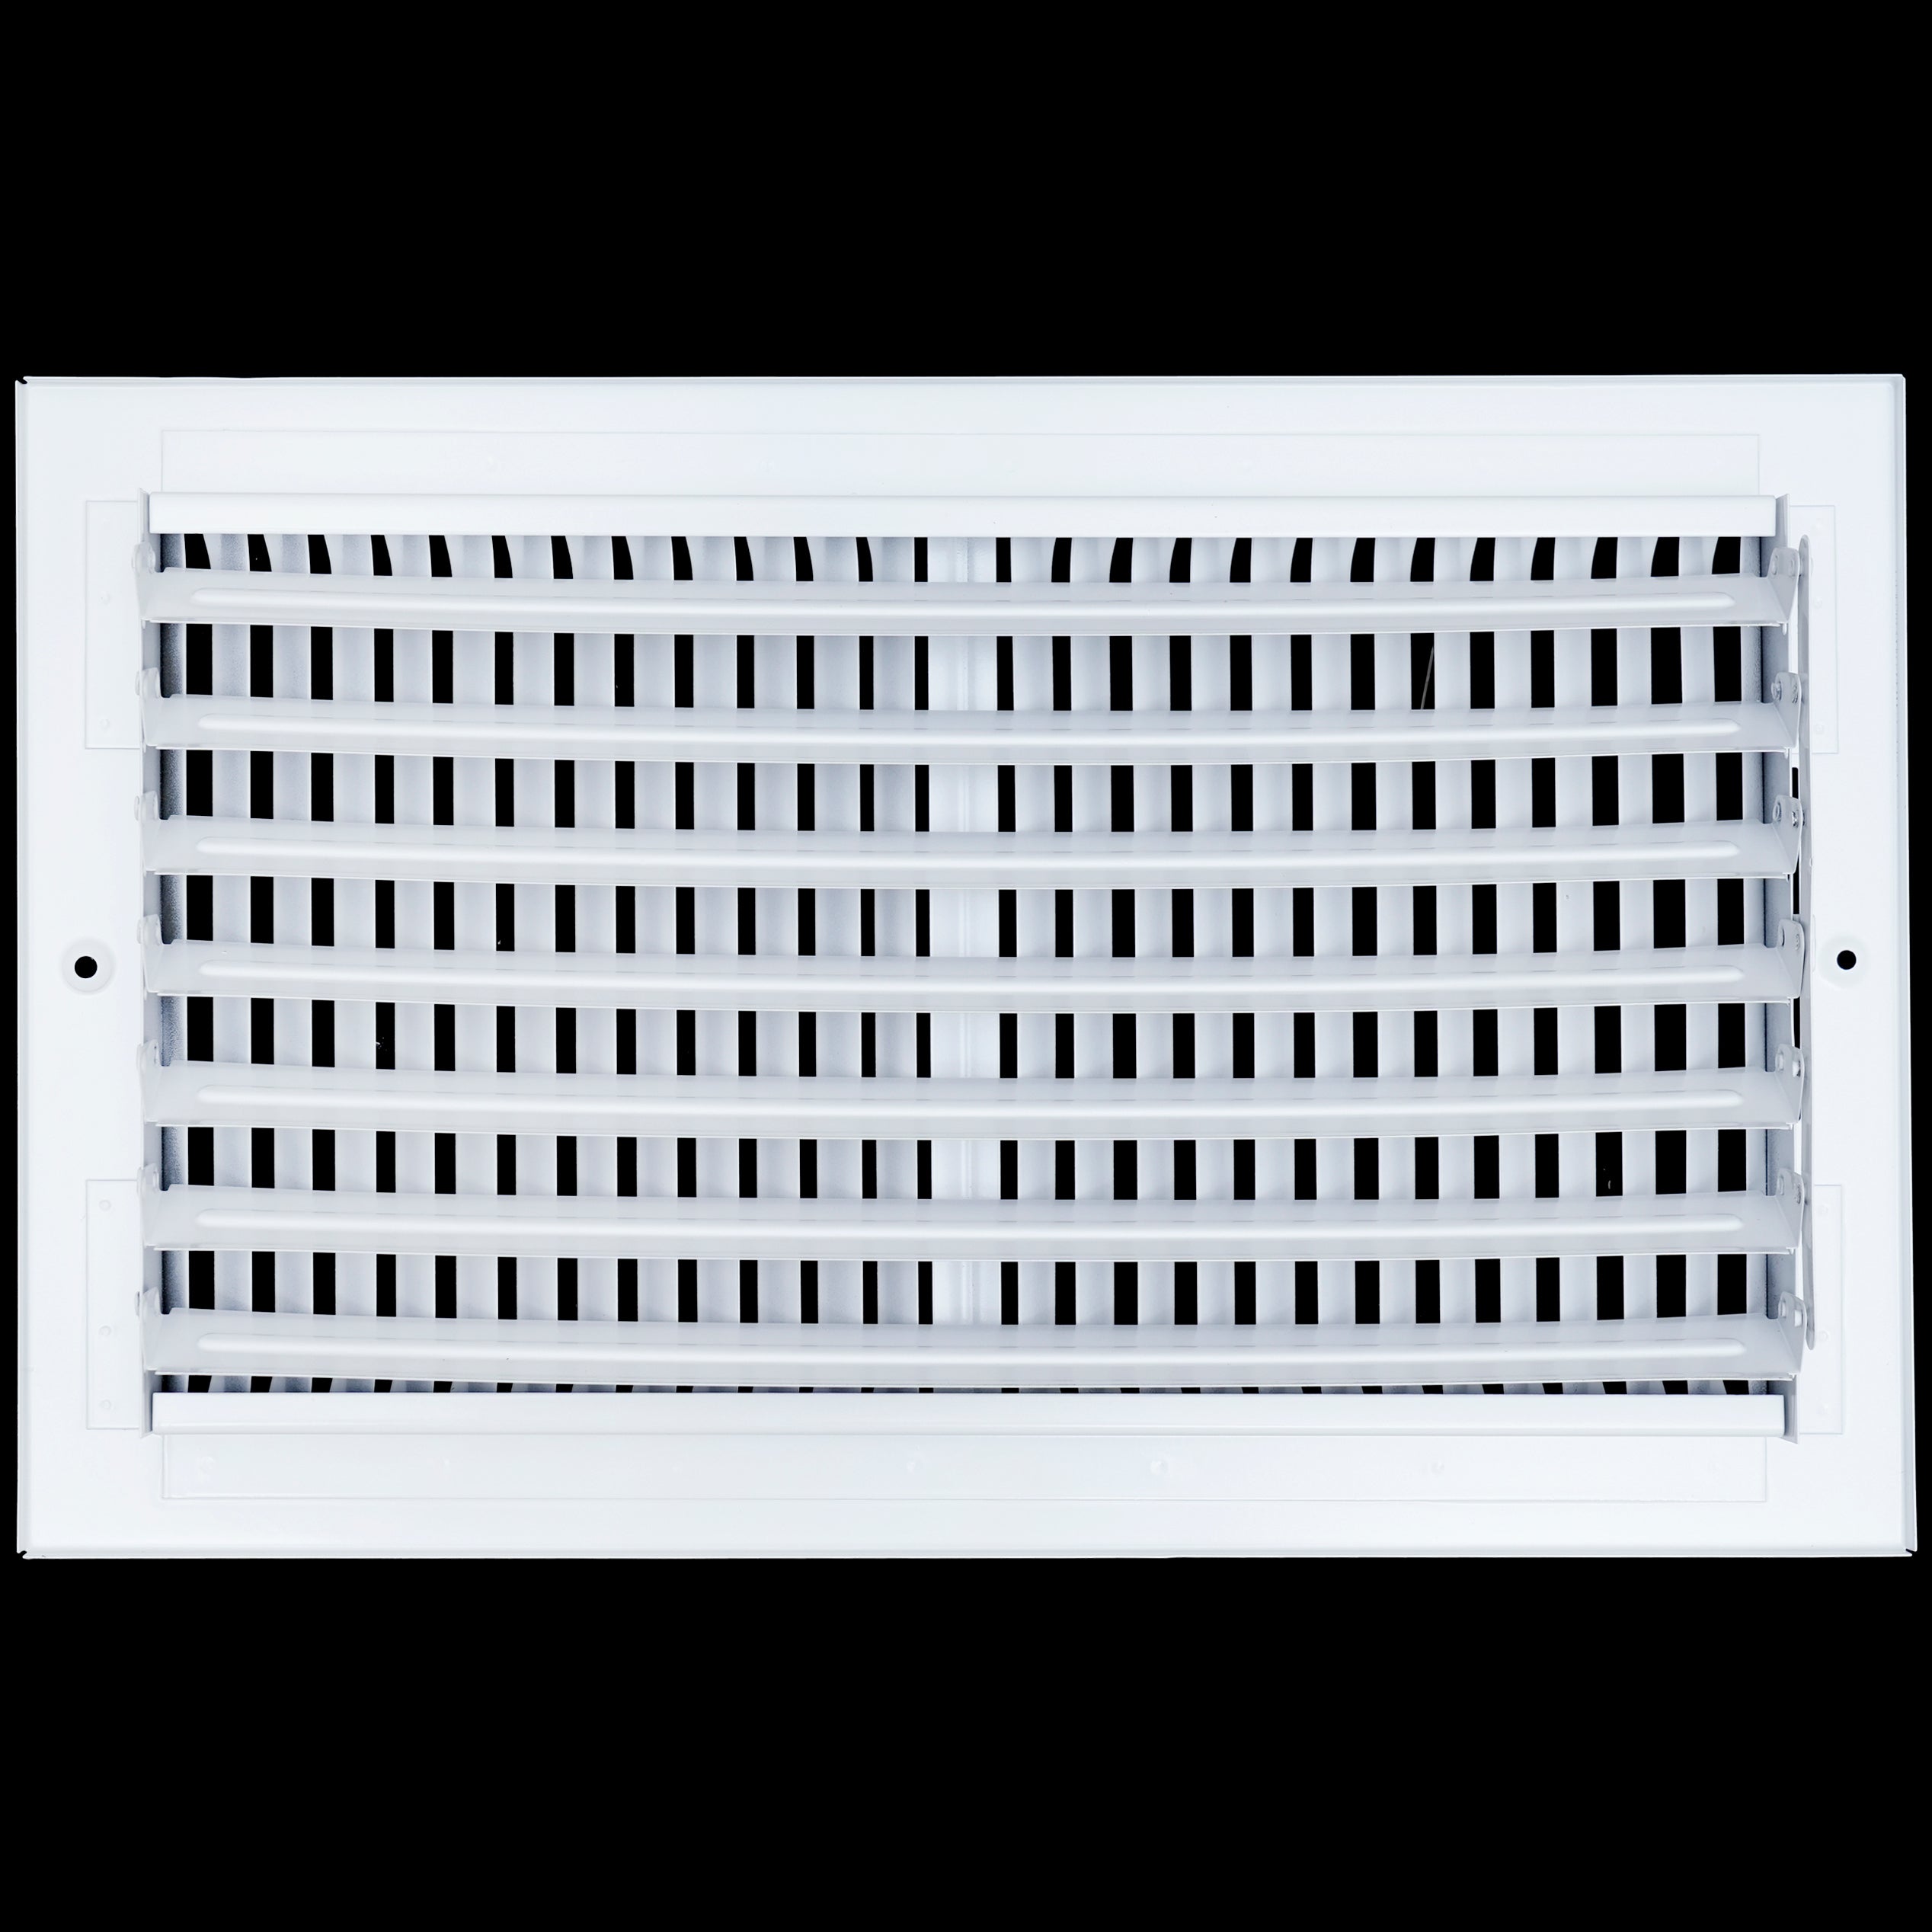 14 X 8 Duct Opening | 2 WAY Steel Air Supply Diffuser for Sidewall and Ceiling